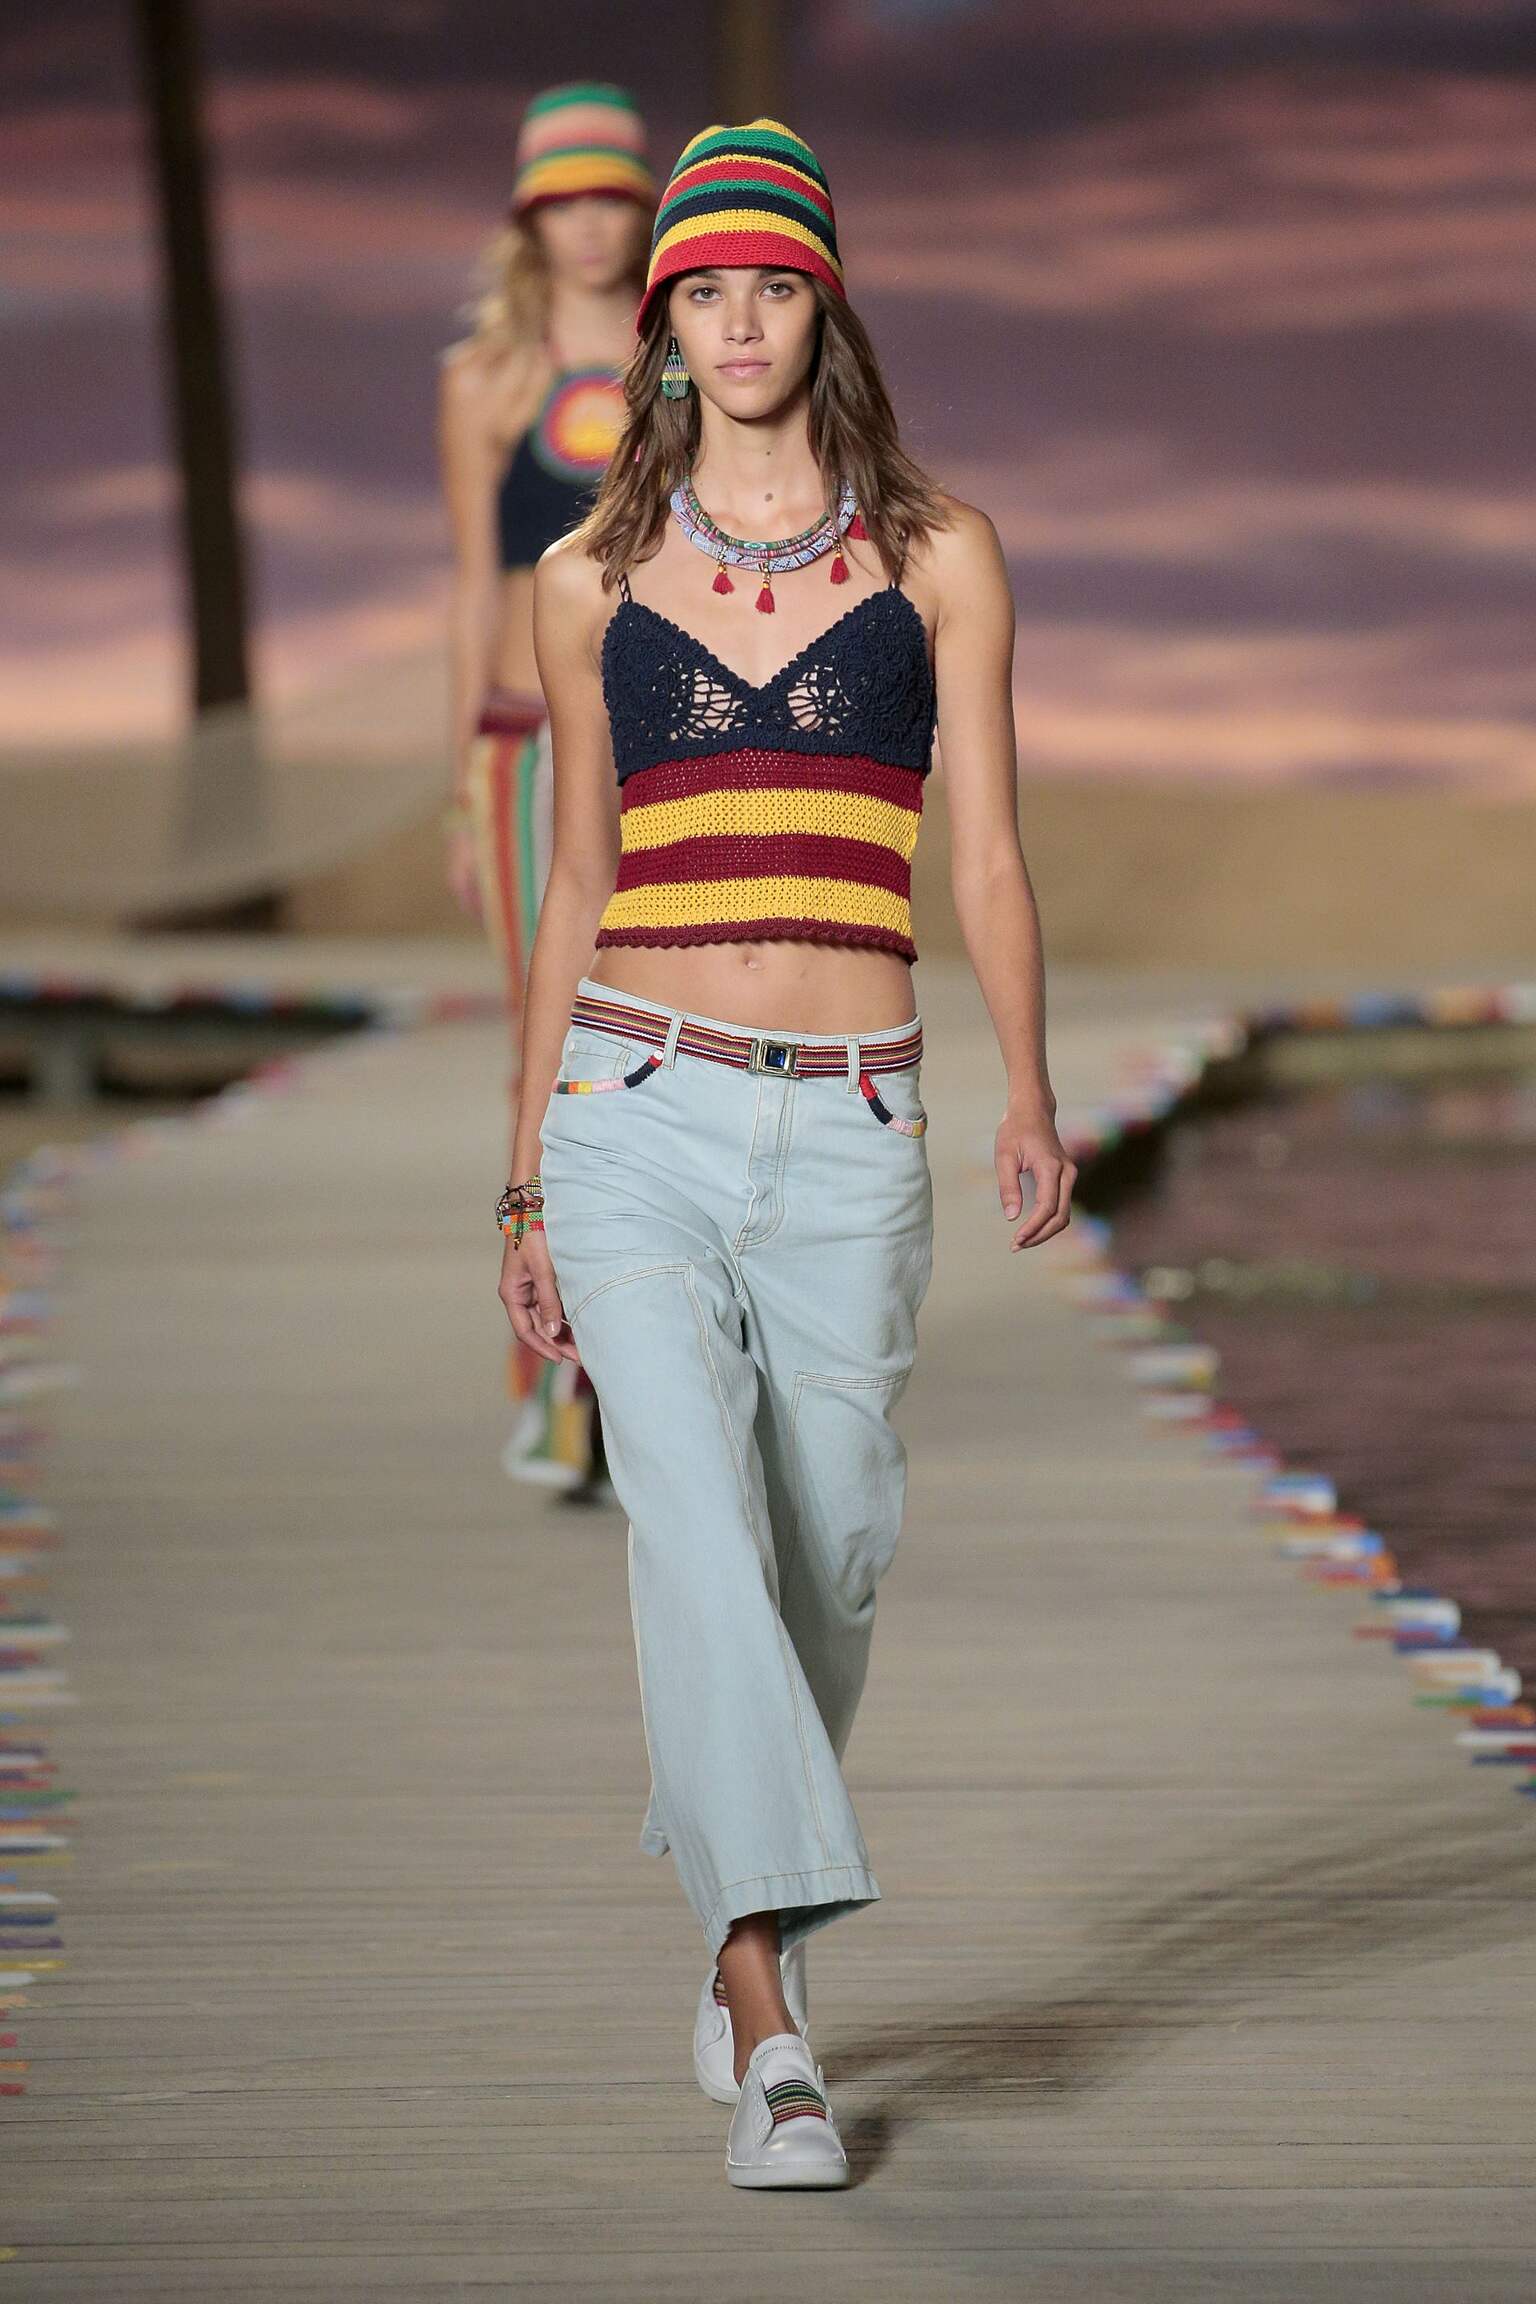 Tommy Hilfiger Women's Collection 2016